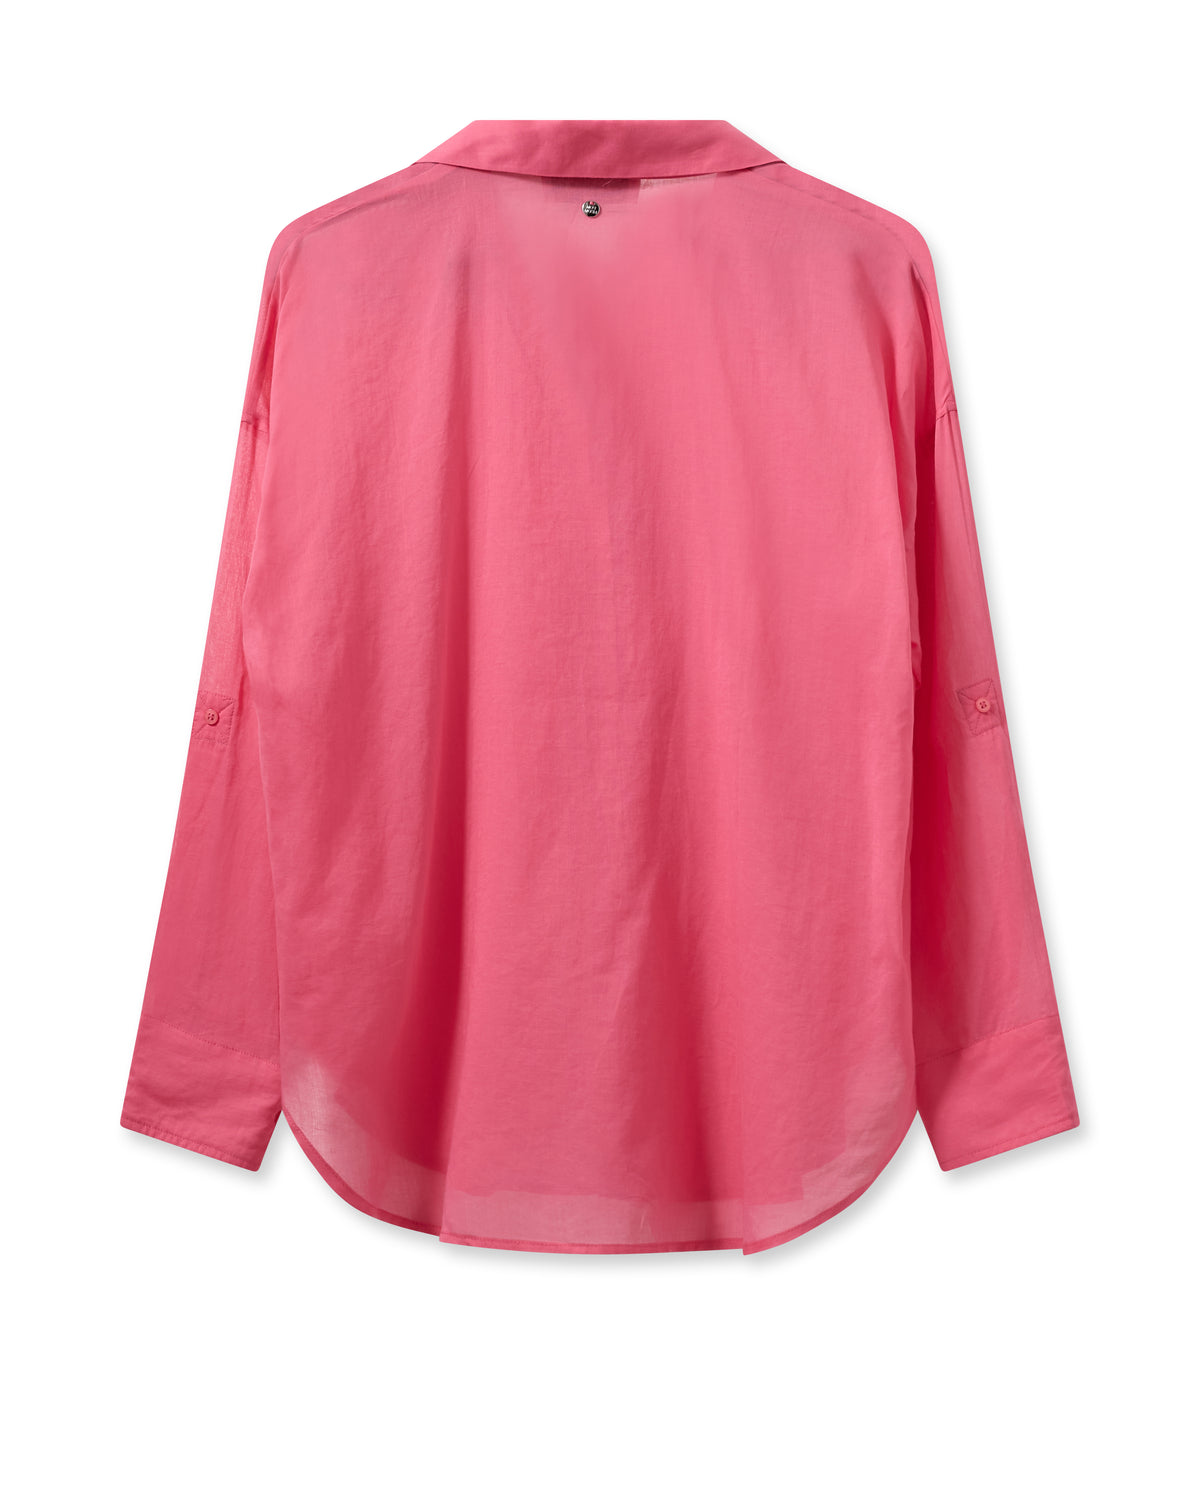 Pink shirt with ruffle detail and button back sleeve